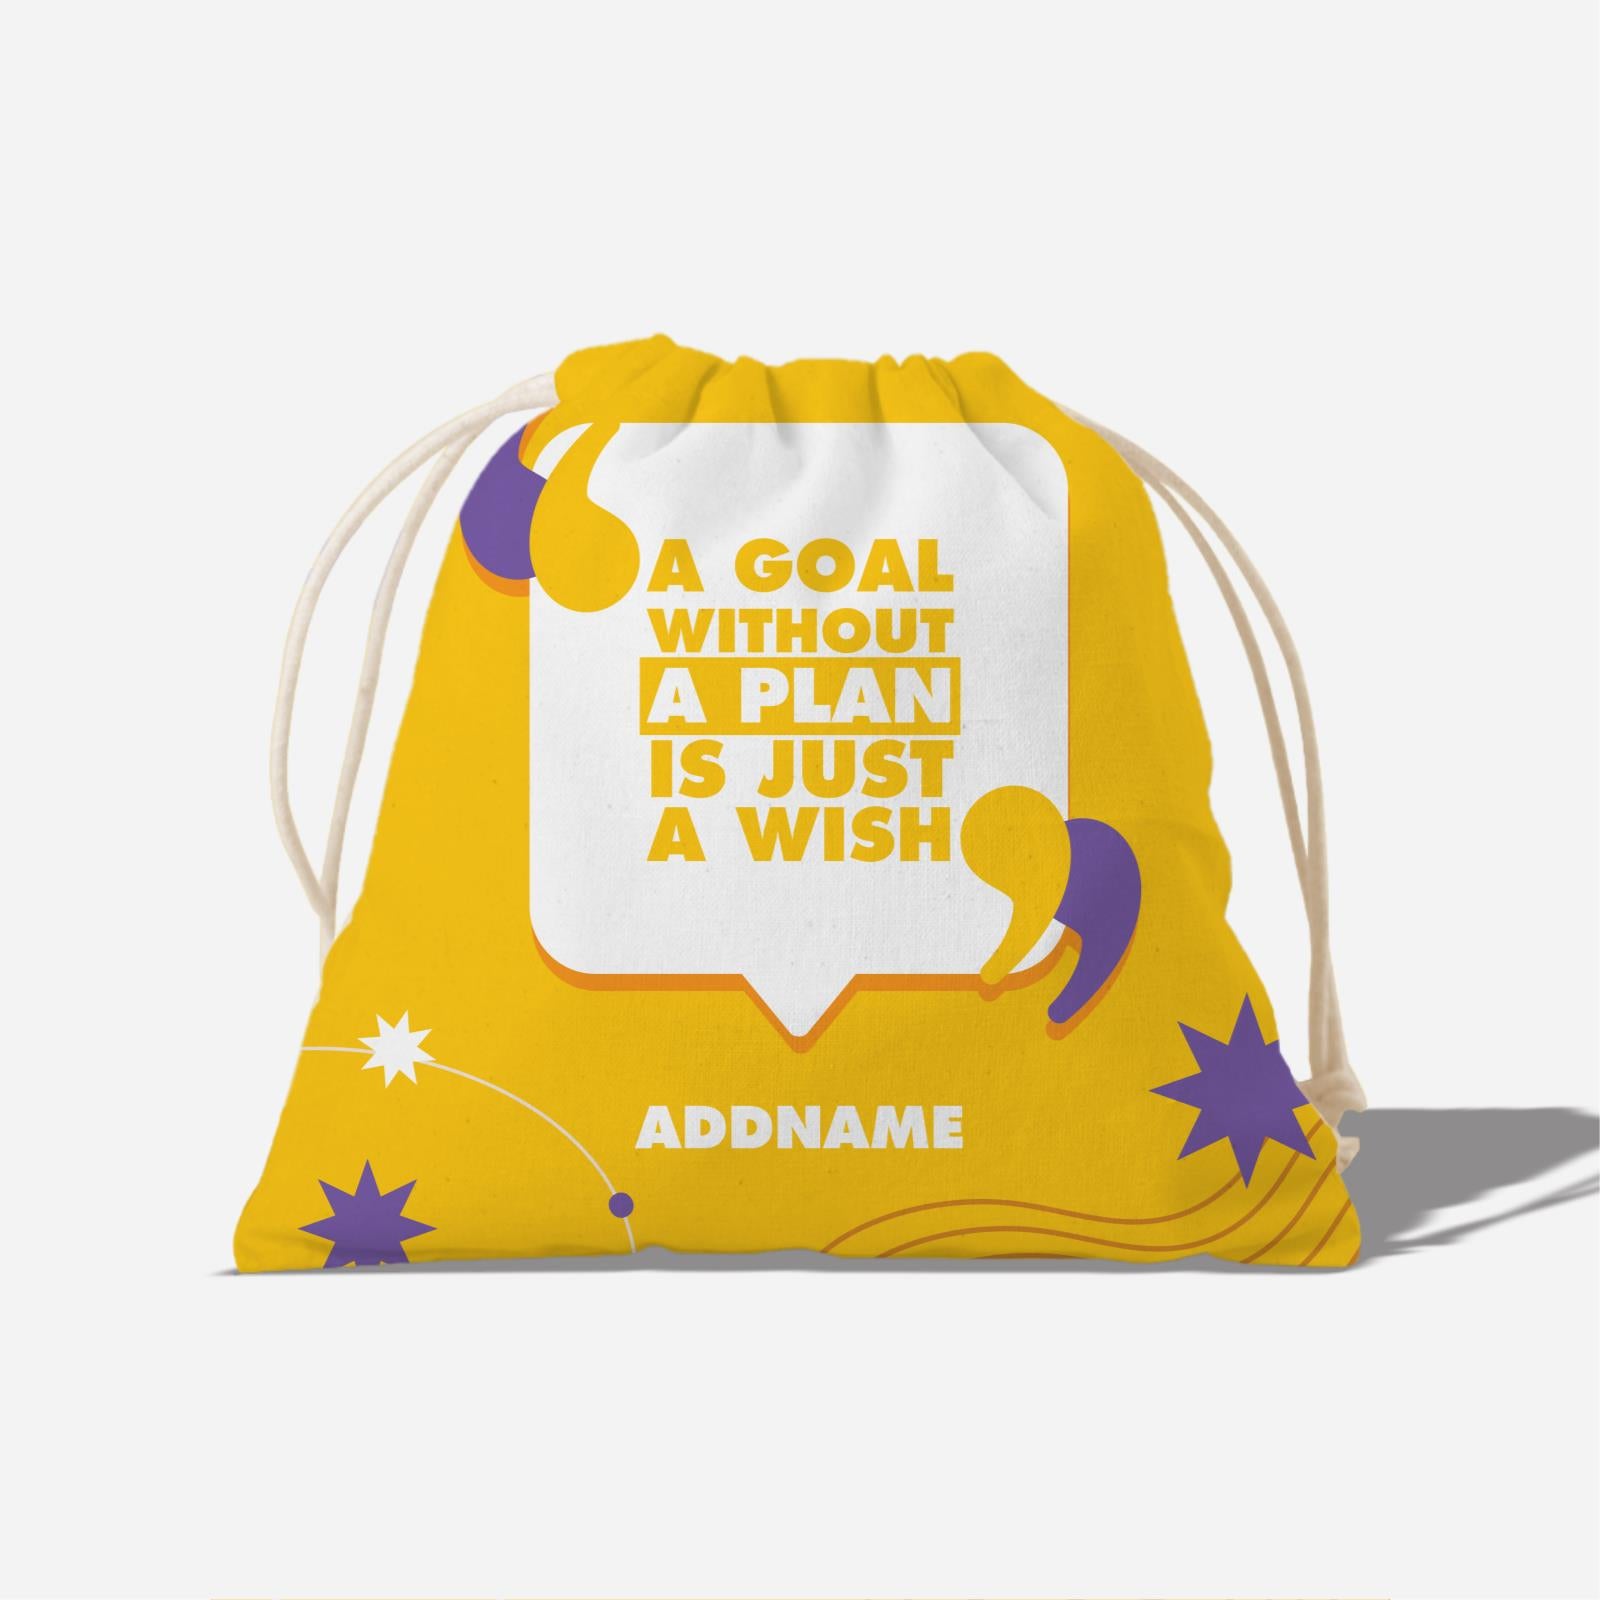 Be Confident Series Satchel - A Goal Without a Plan Is Just A Wish - Yellow